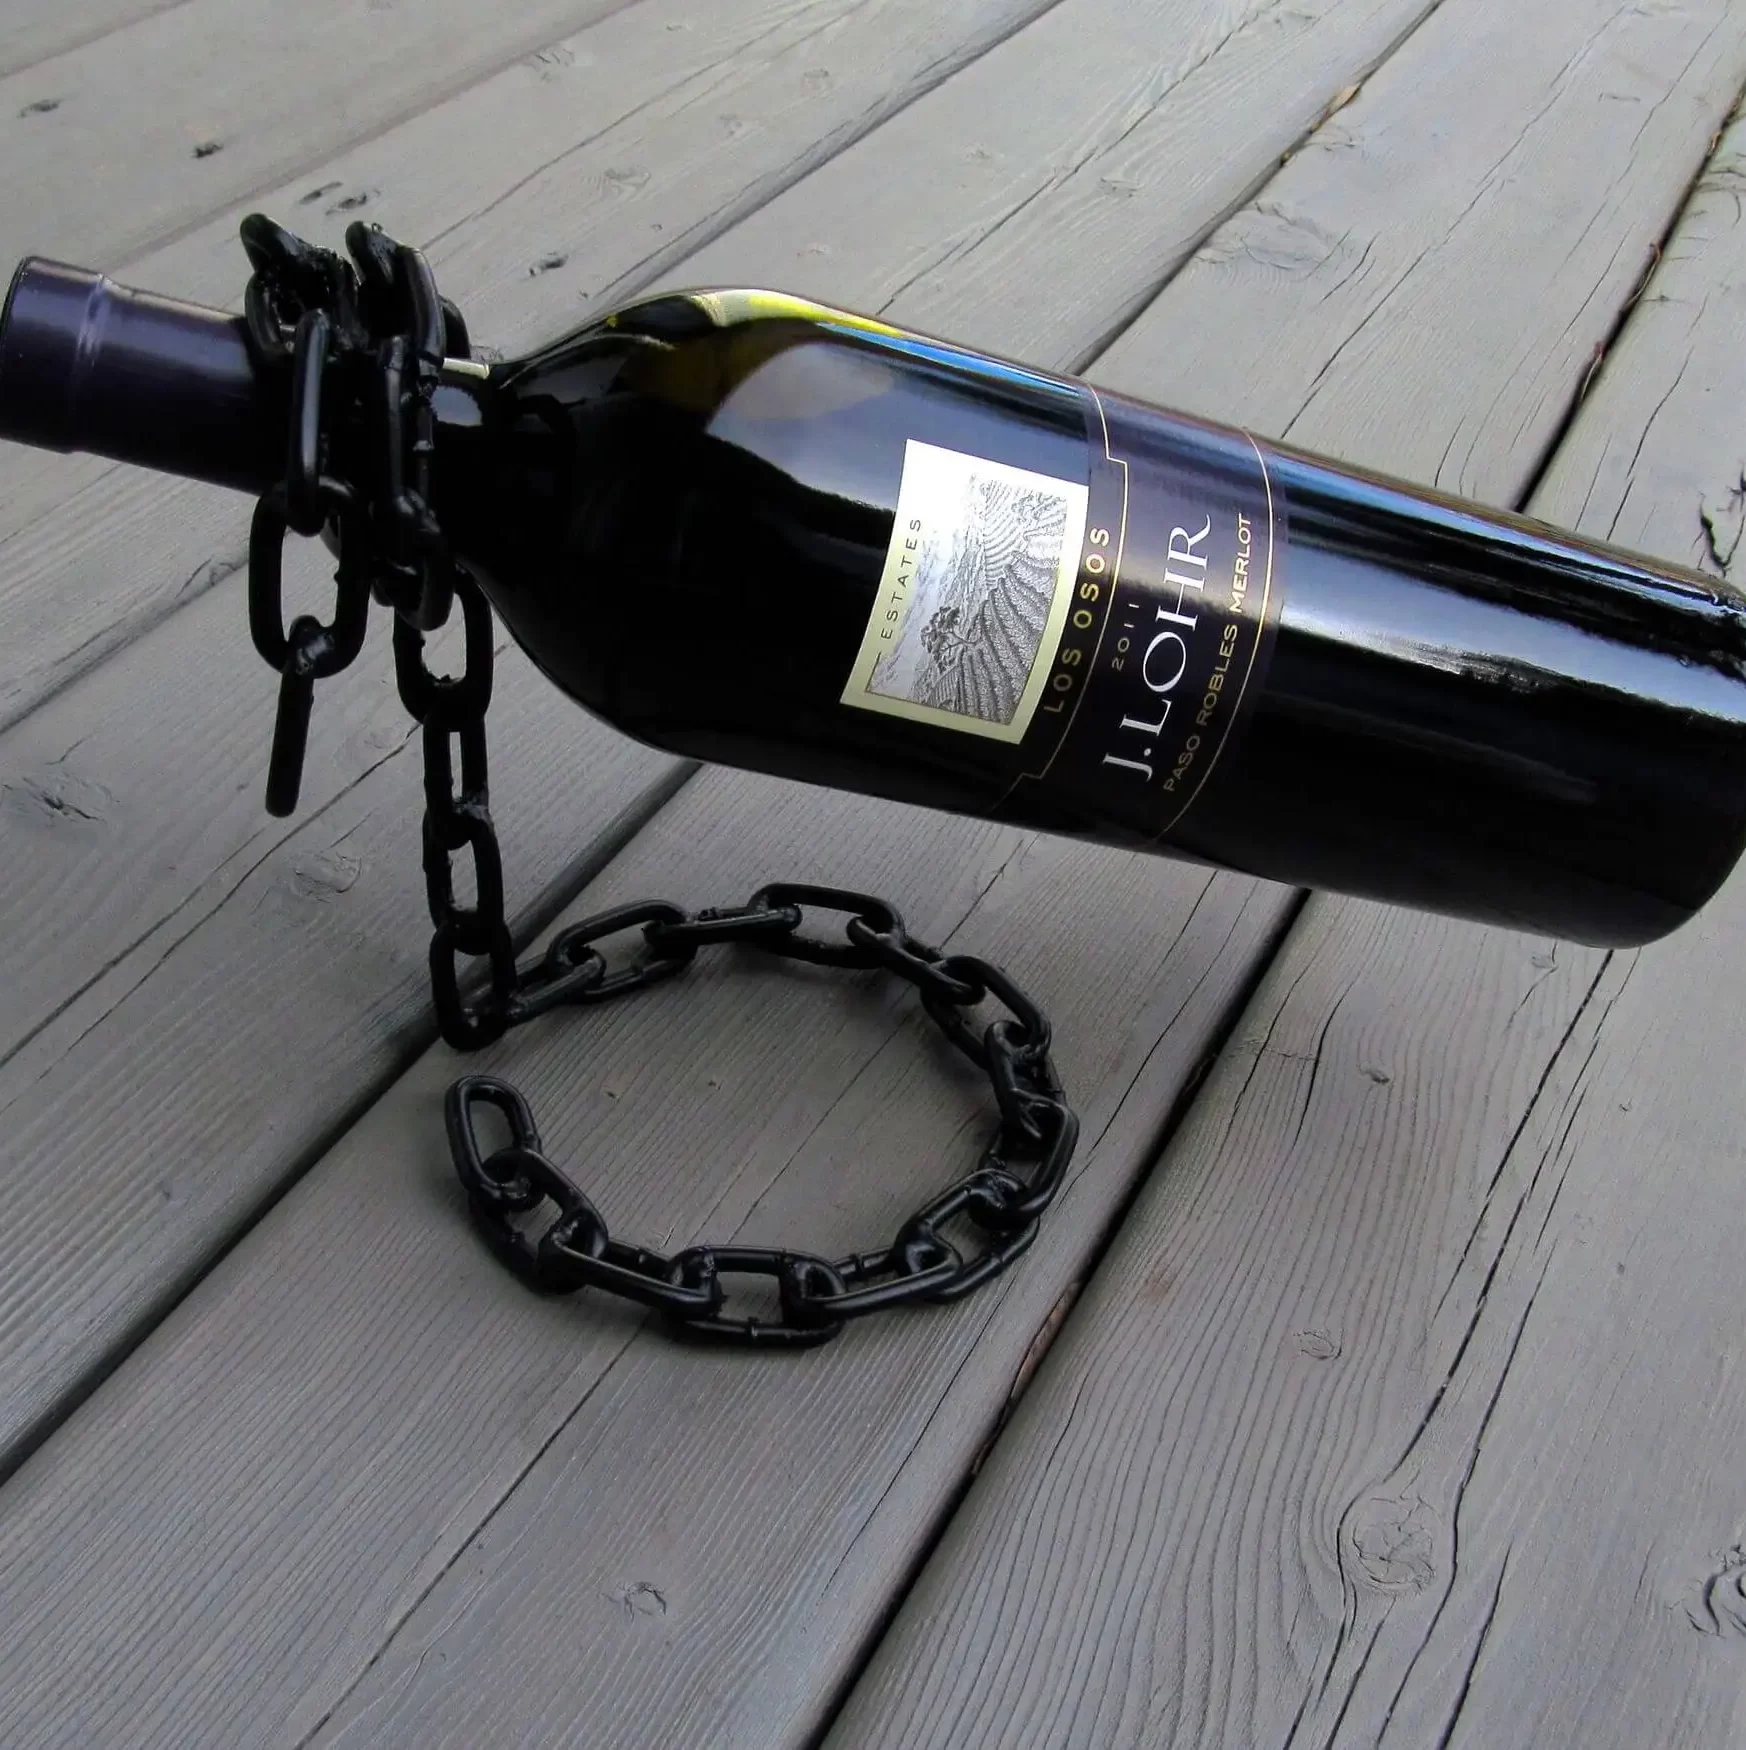 DIY wine bottle holder made from a chain welded in place